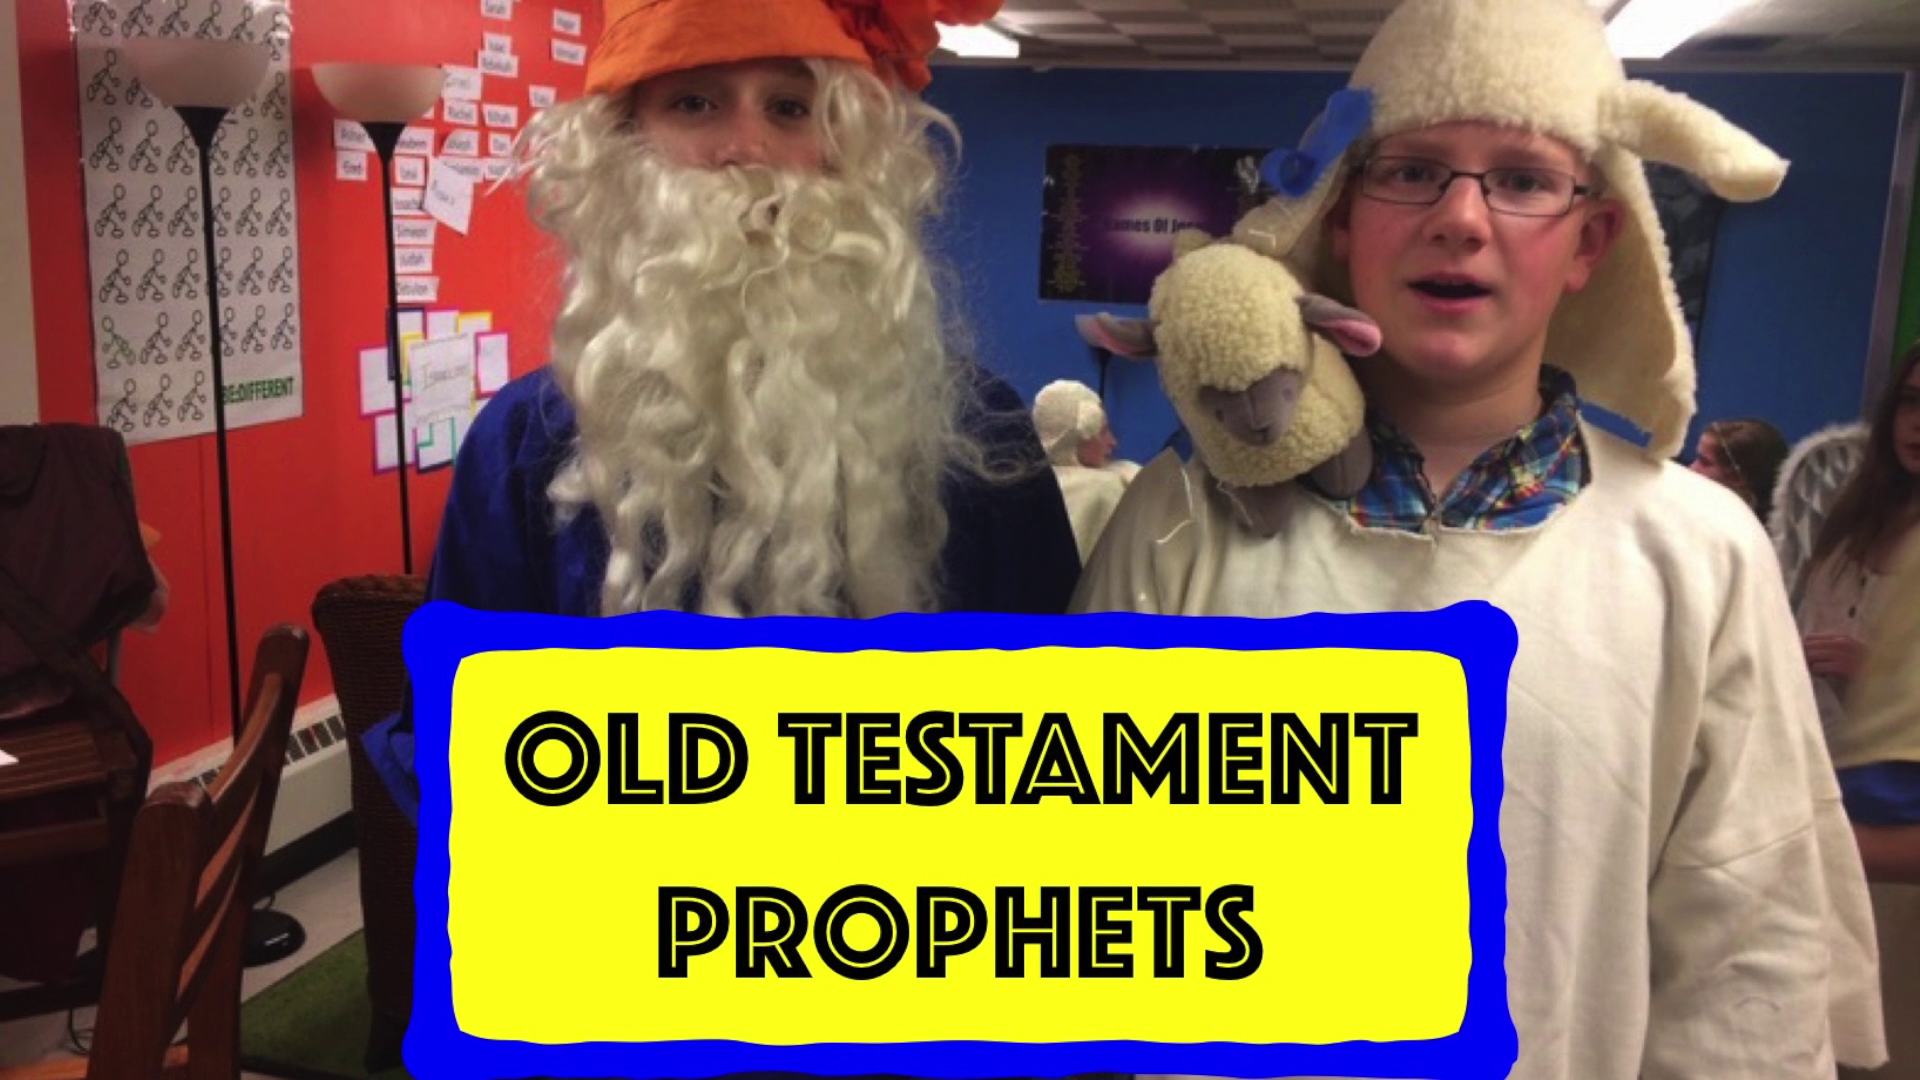 The Prophets! Image